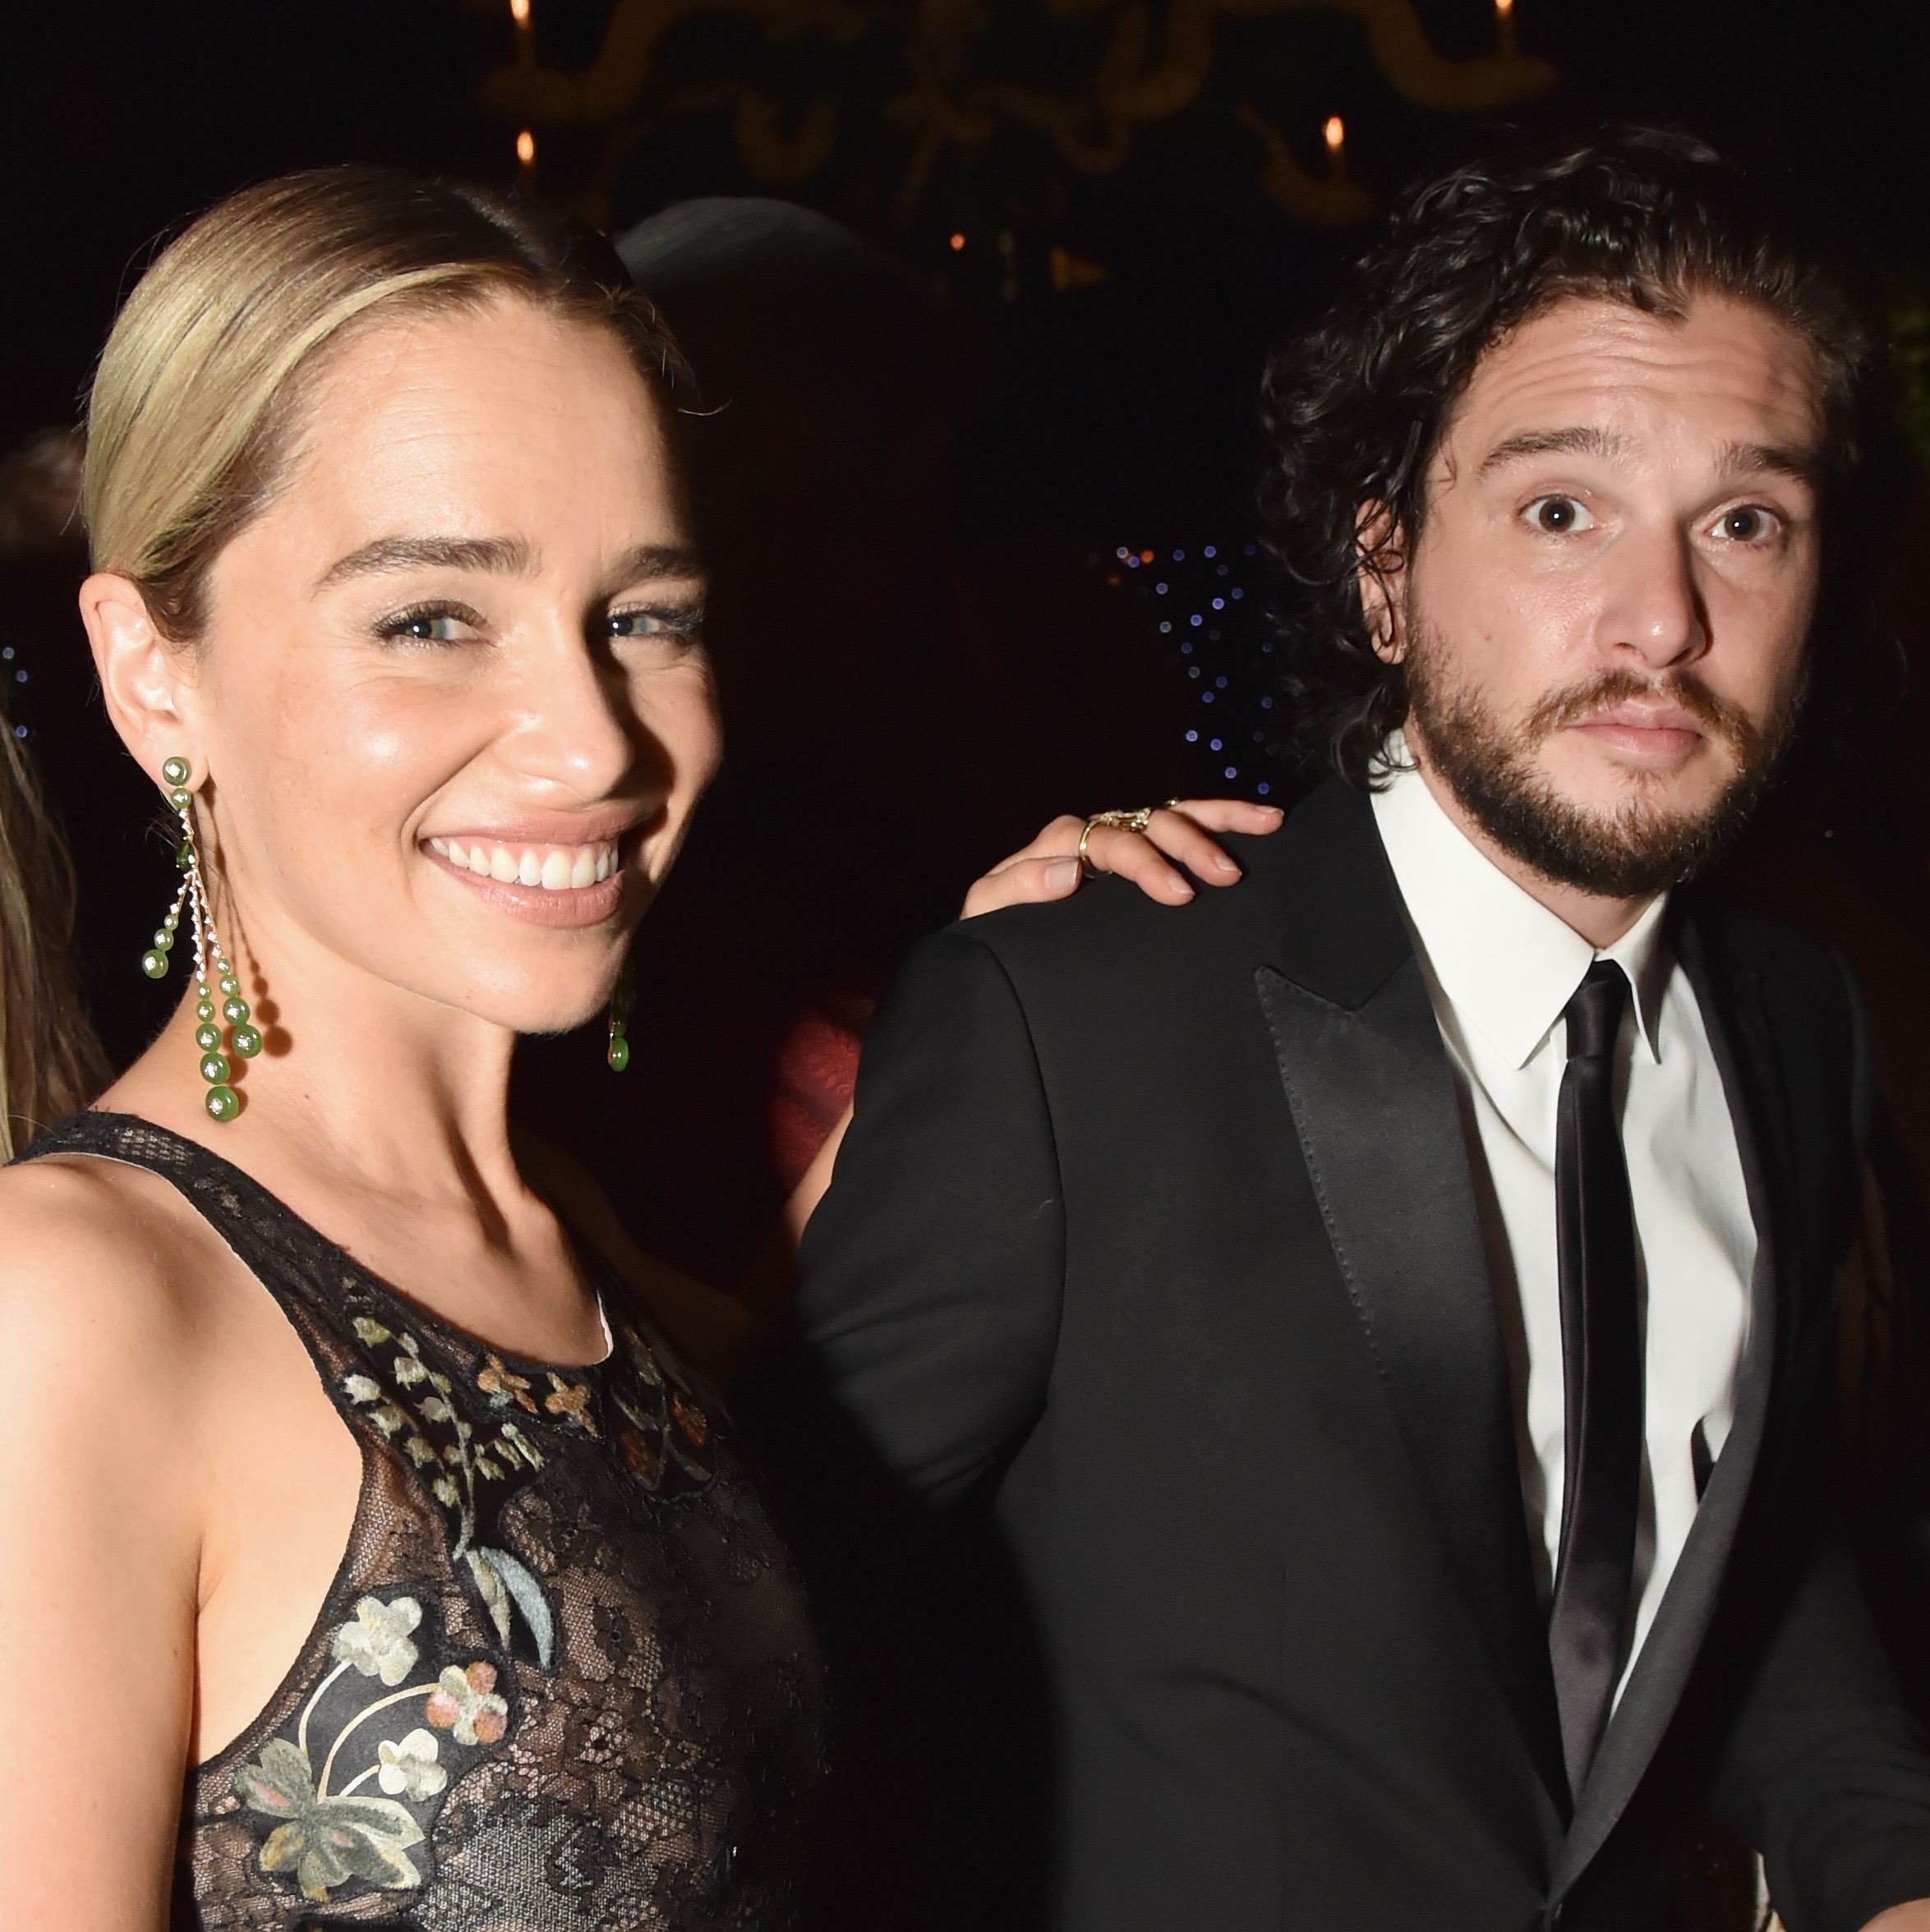 Emilia Clarke and George R.R. Martin Are Out Dropping Hints About the 'Game of Thrones' Jon Snow Spinoff